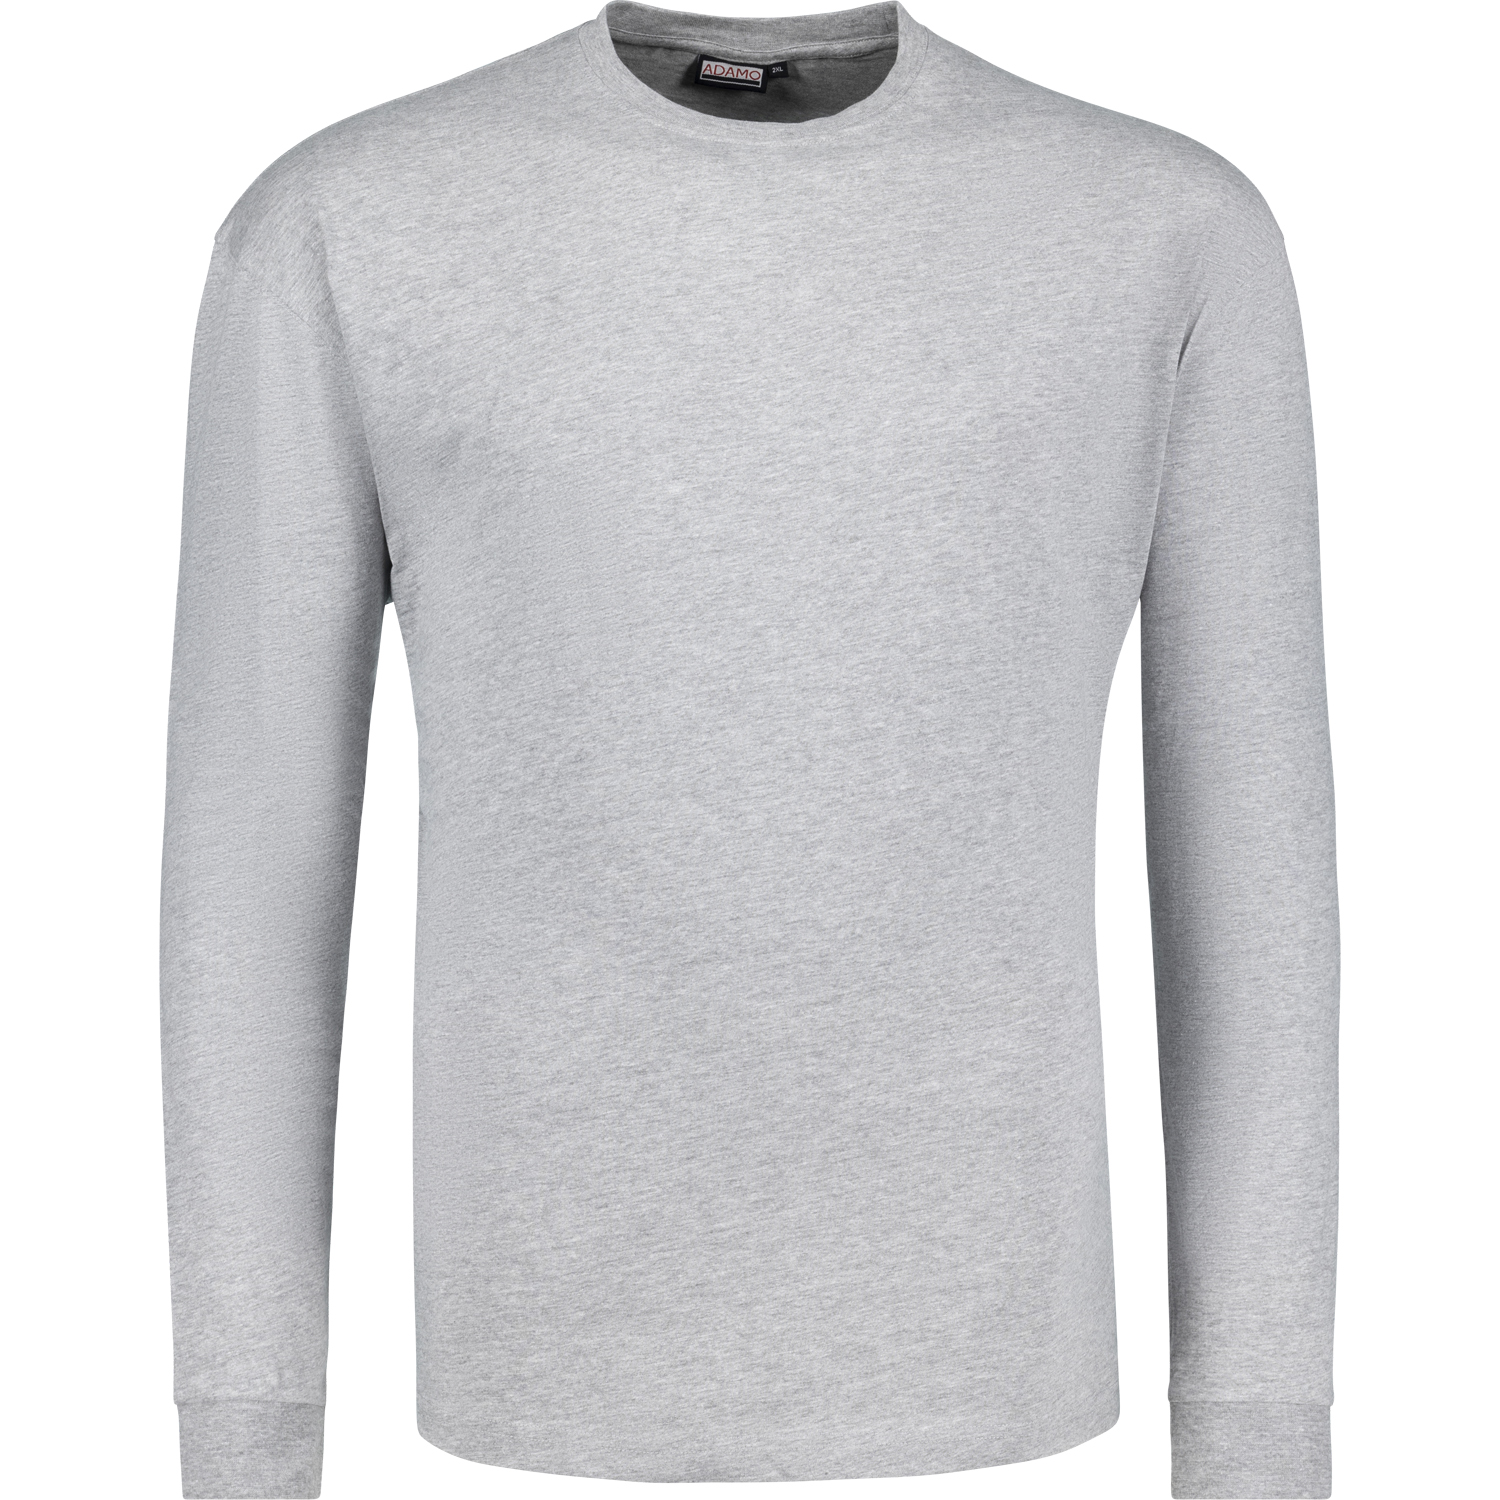 ADAMO longsleeve COMFORT FIT for men in grey with round neck up to size 12XL